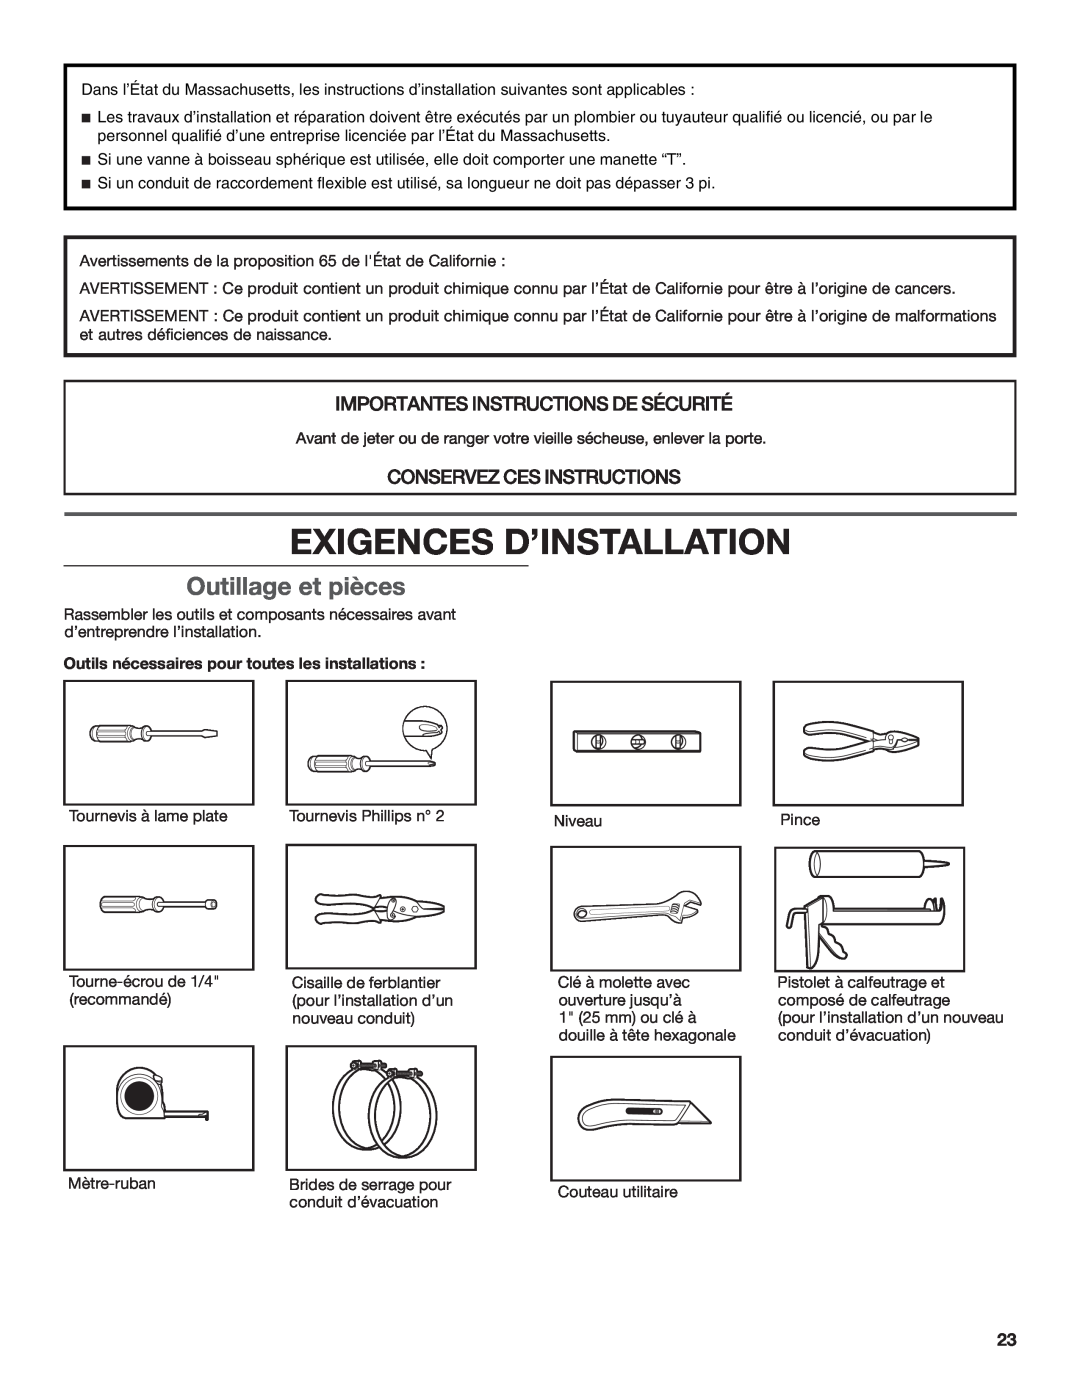 Maytag MGDX600XW, W10097000A-SP, W10096984A installation instructions Exigences D’Installation, Outillage et pièces 